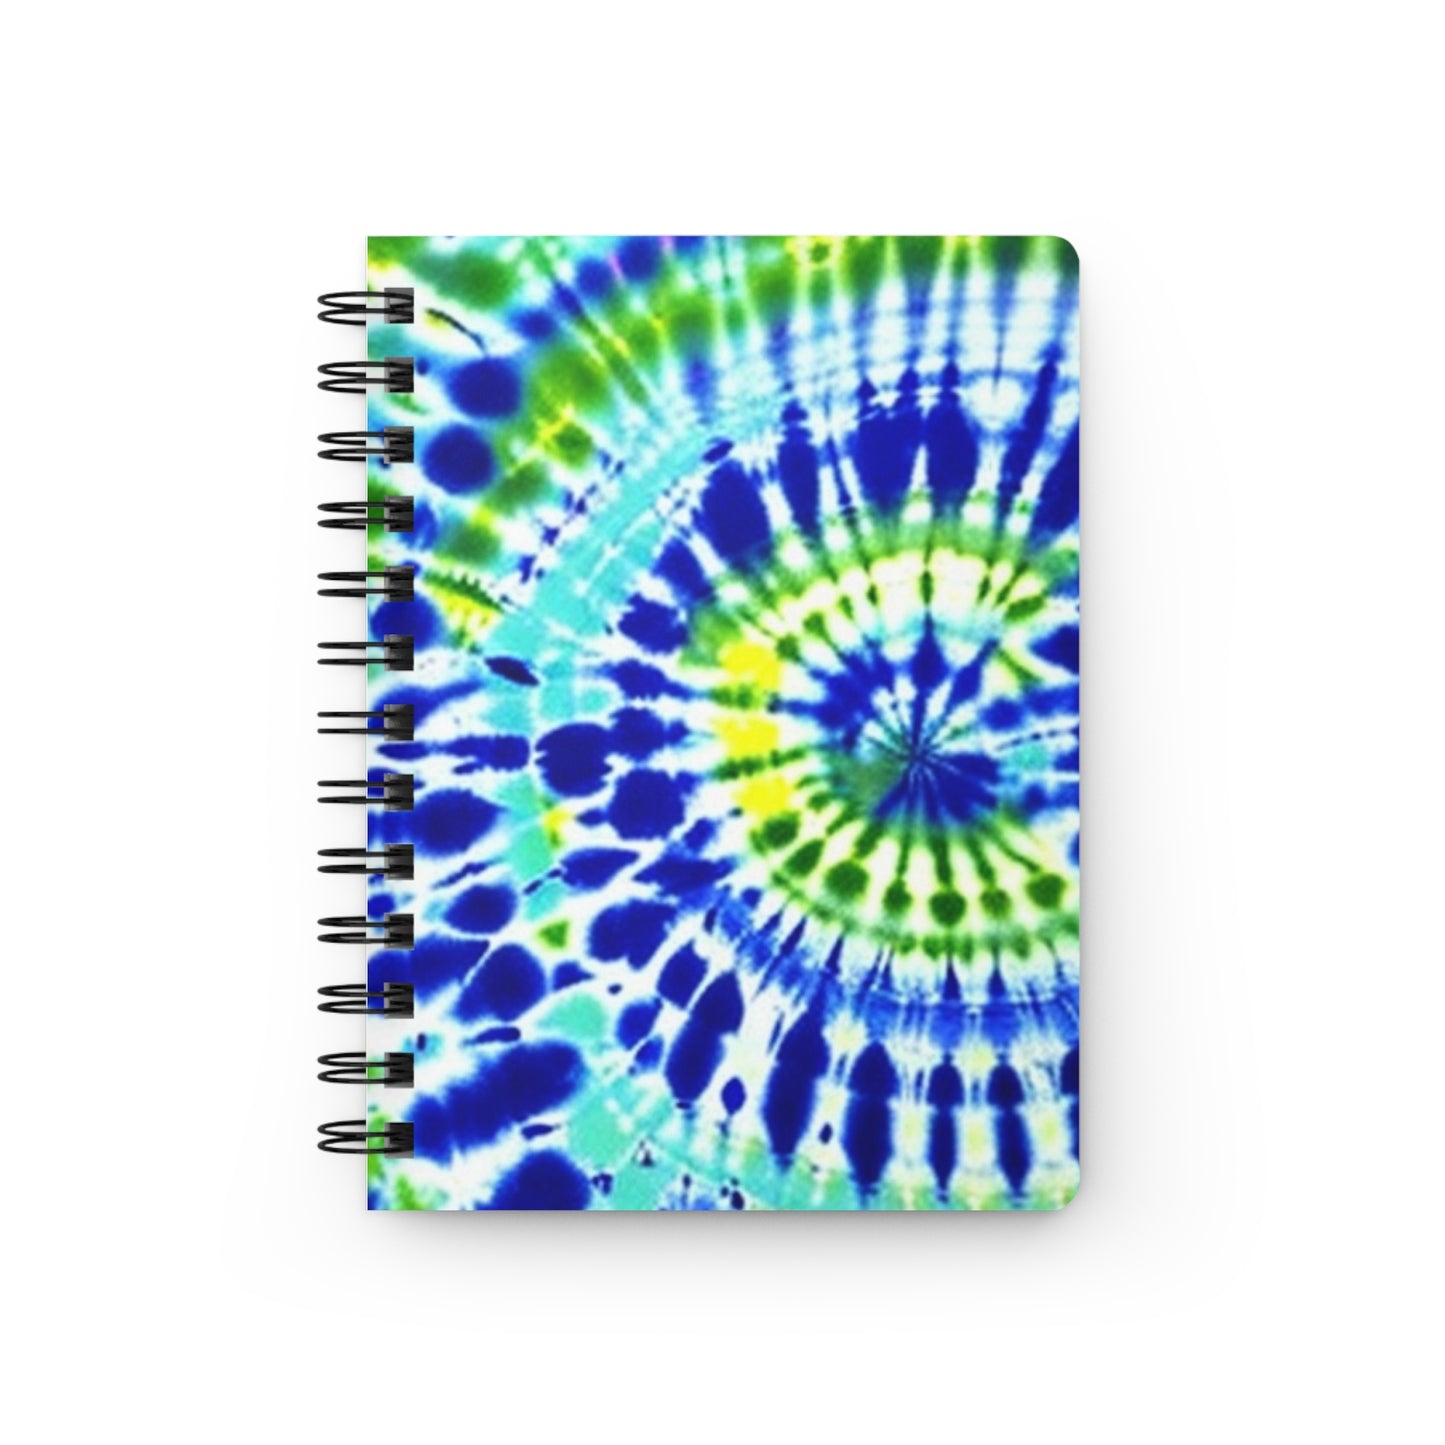 Blue and Lime Green Beach Surfer Coastal Tie Dye Writing Sketch Inspiration Spiral Bound Journal